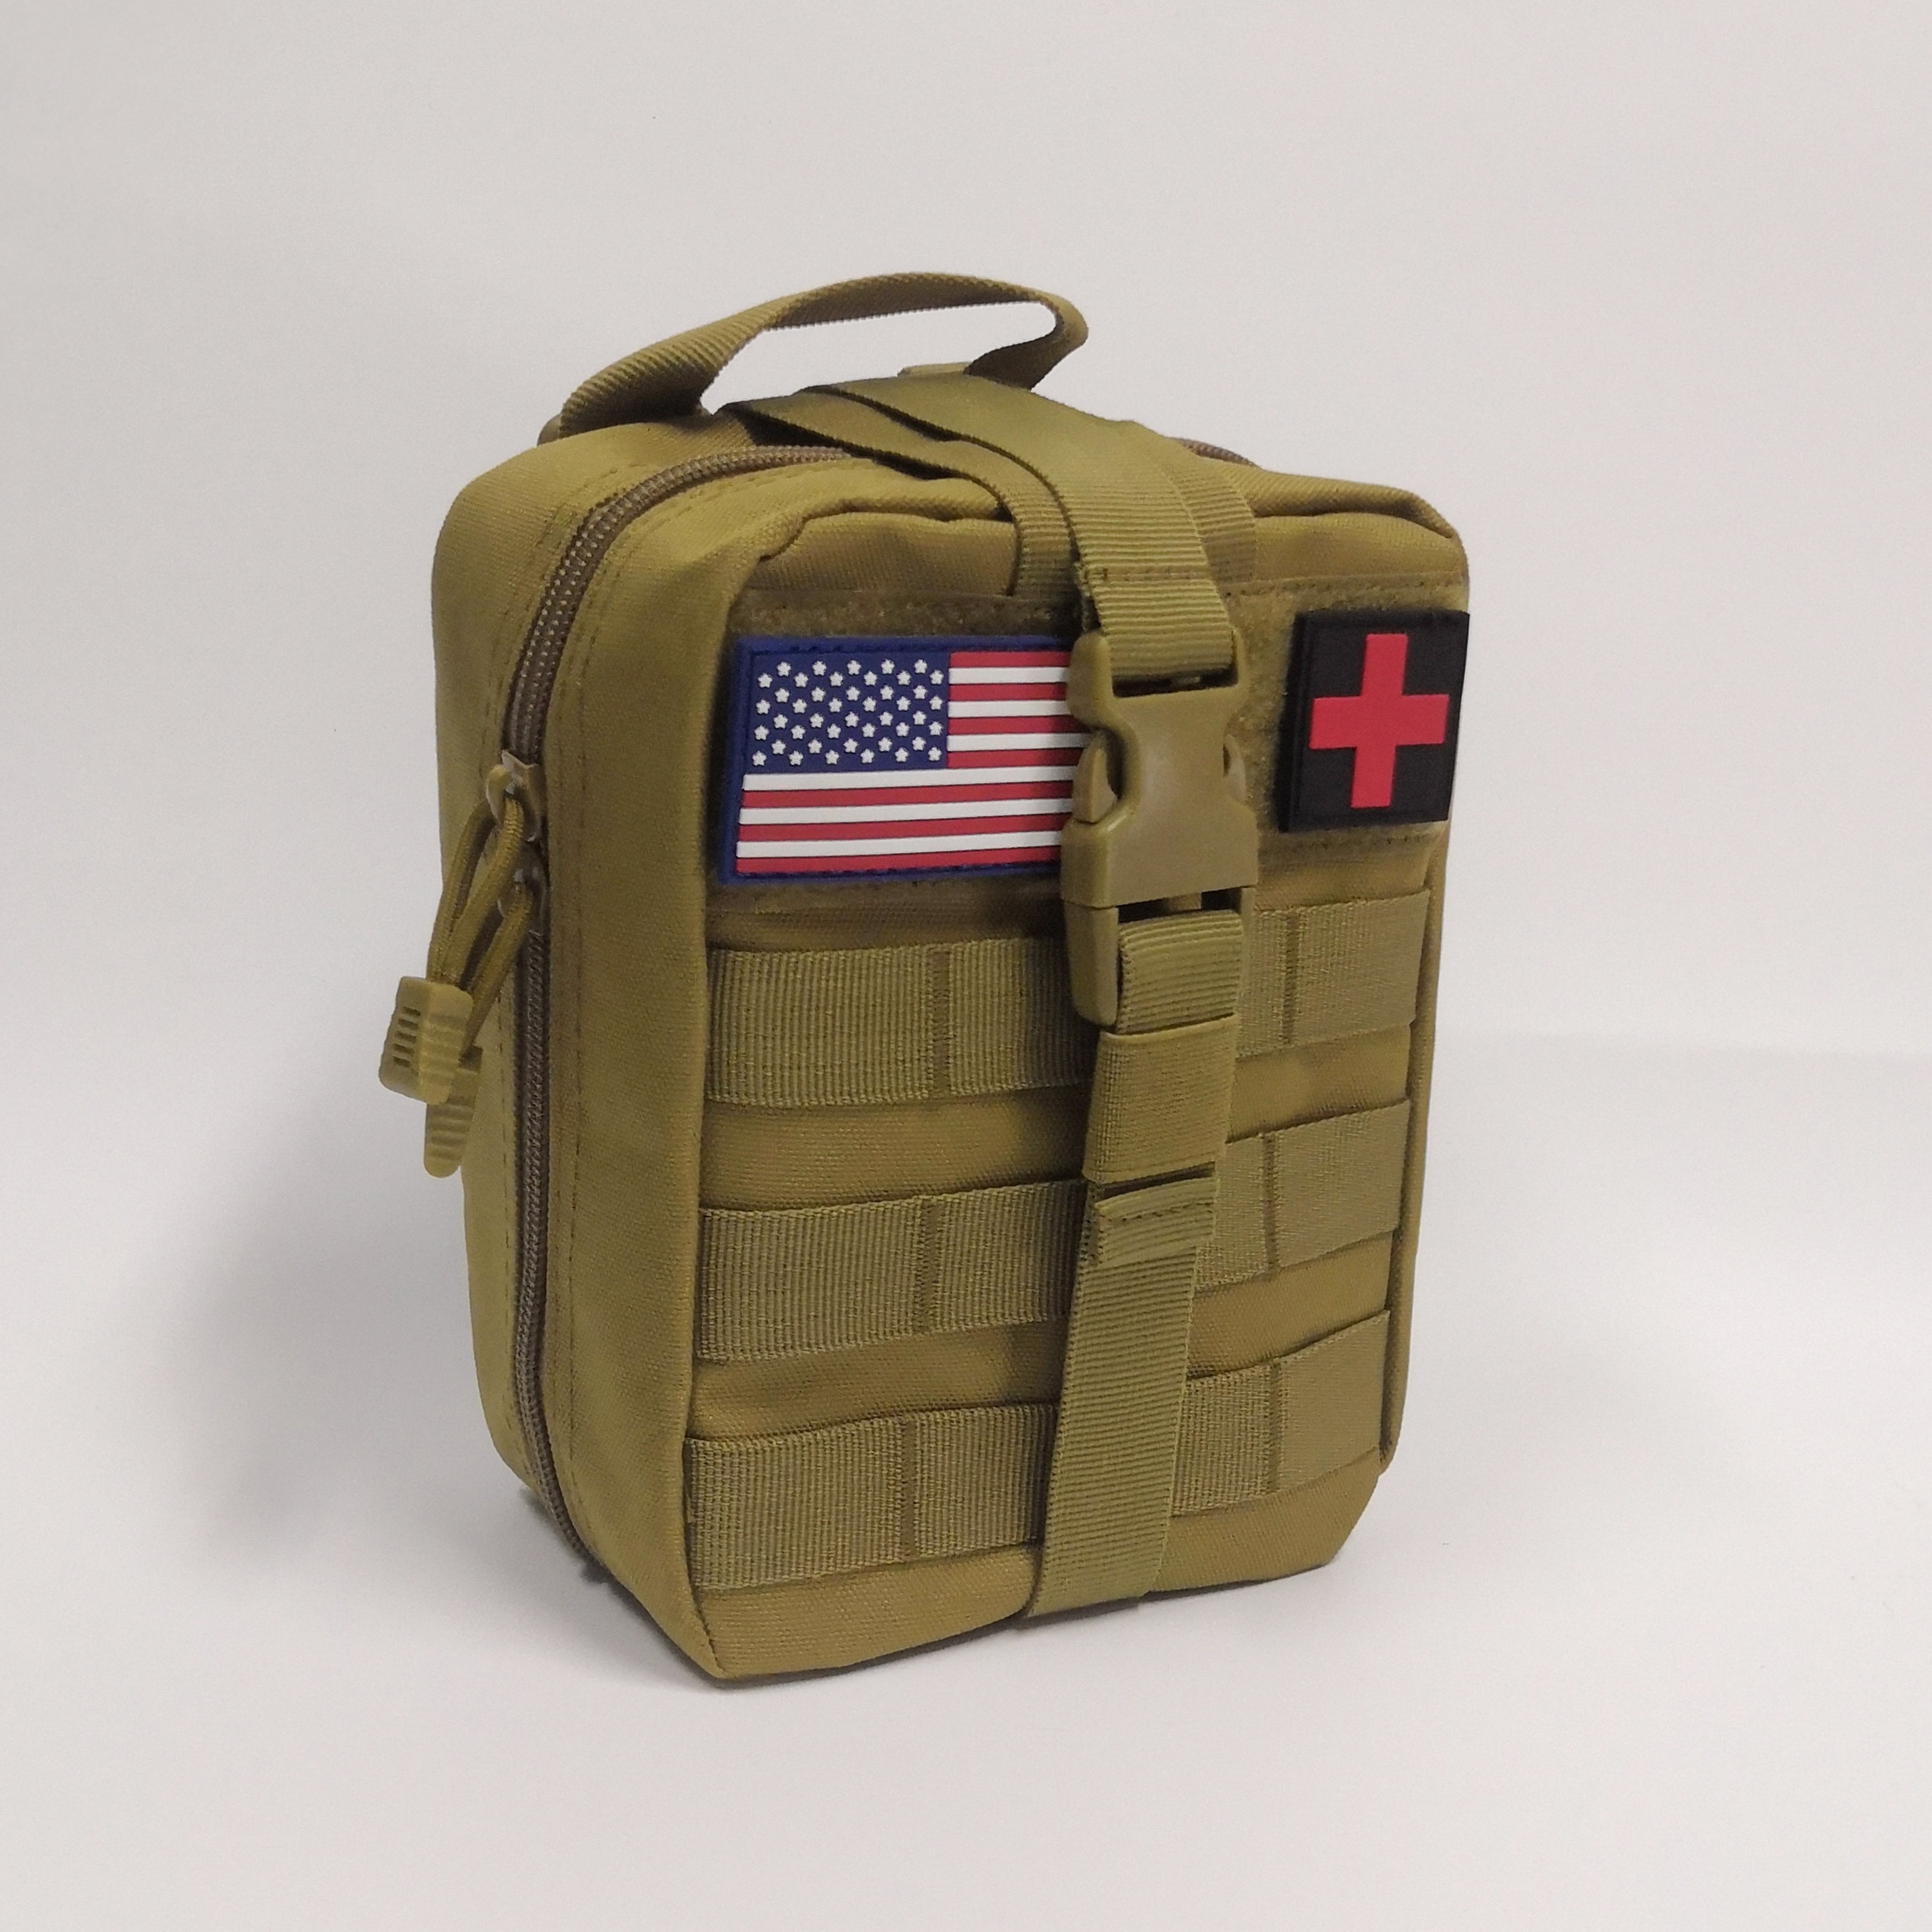 EMT Emergency First Responder Rescue Tool Kit Pouch with Tactical